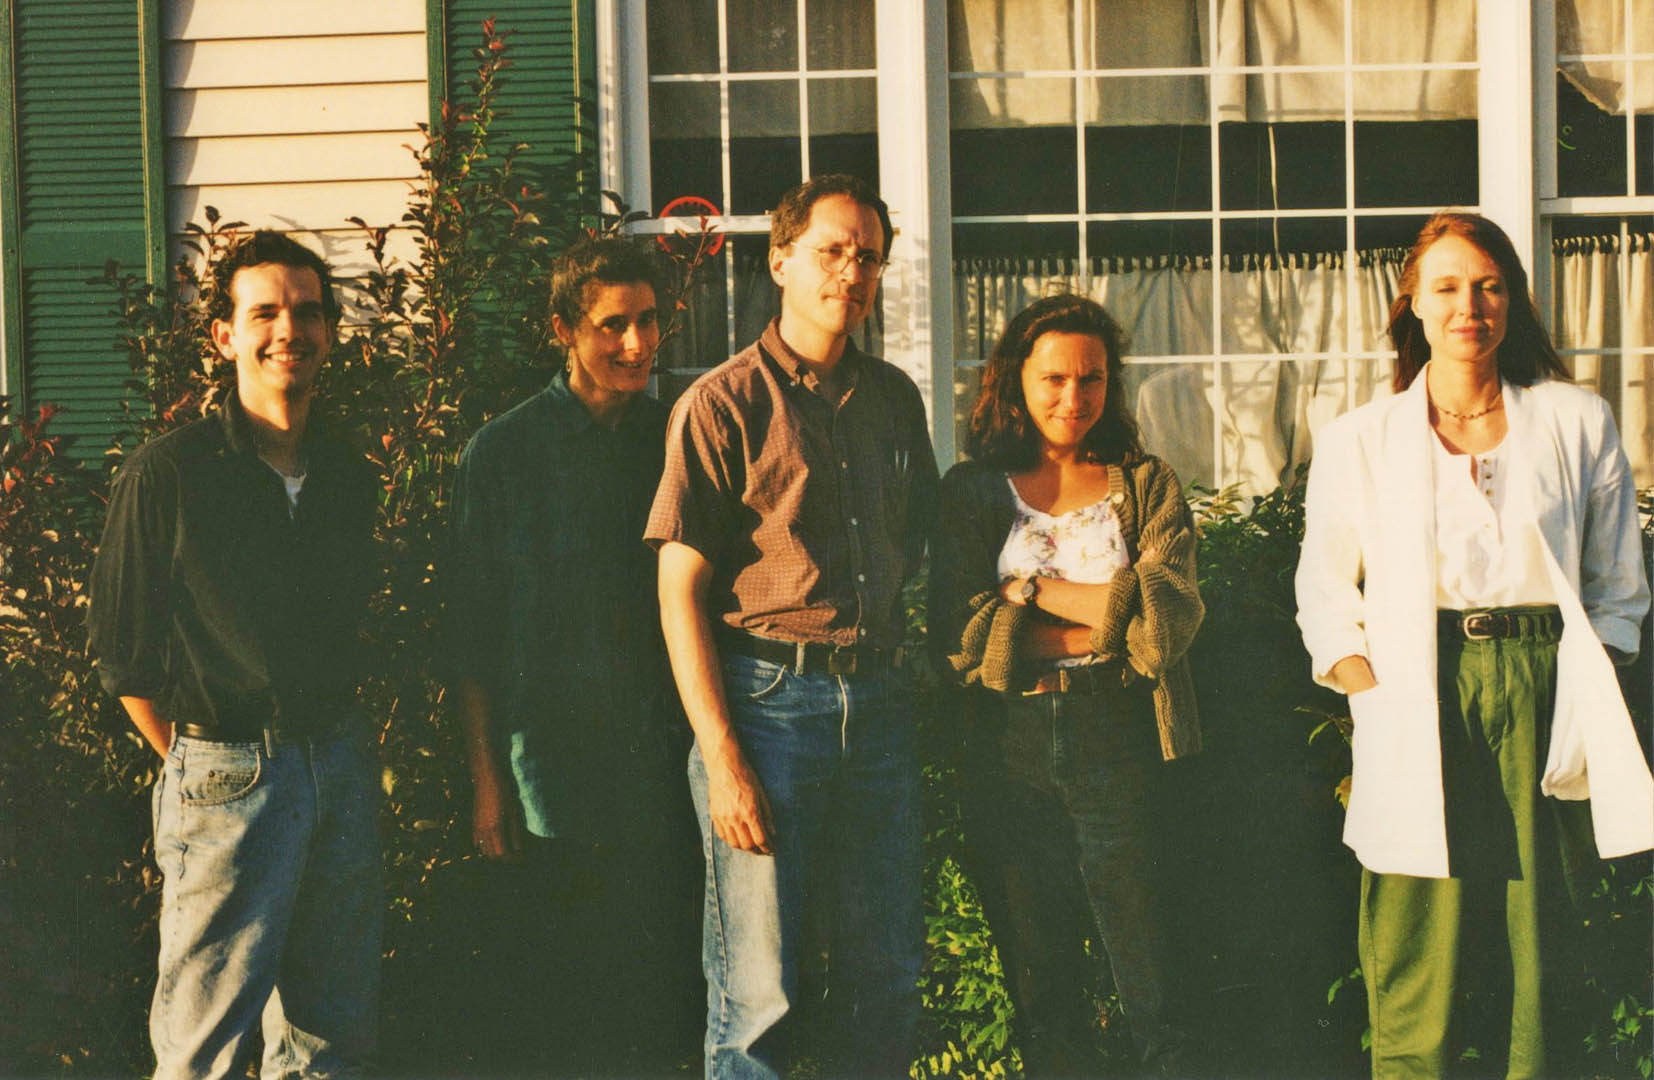 The Cowlix at Norton\'s, summer 1992: Jonathan Nichols-Pethick, Gretchen Schaefer, Doug Hubley, Marcia Goldenberg and Melinda McCardell. We opened for the Slaid Cleaves and the Moxie Men. Photo by Jeff Stanton.